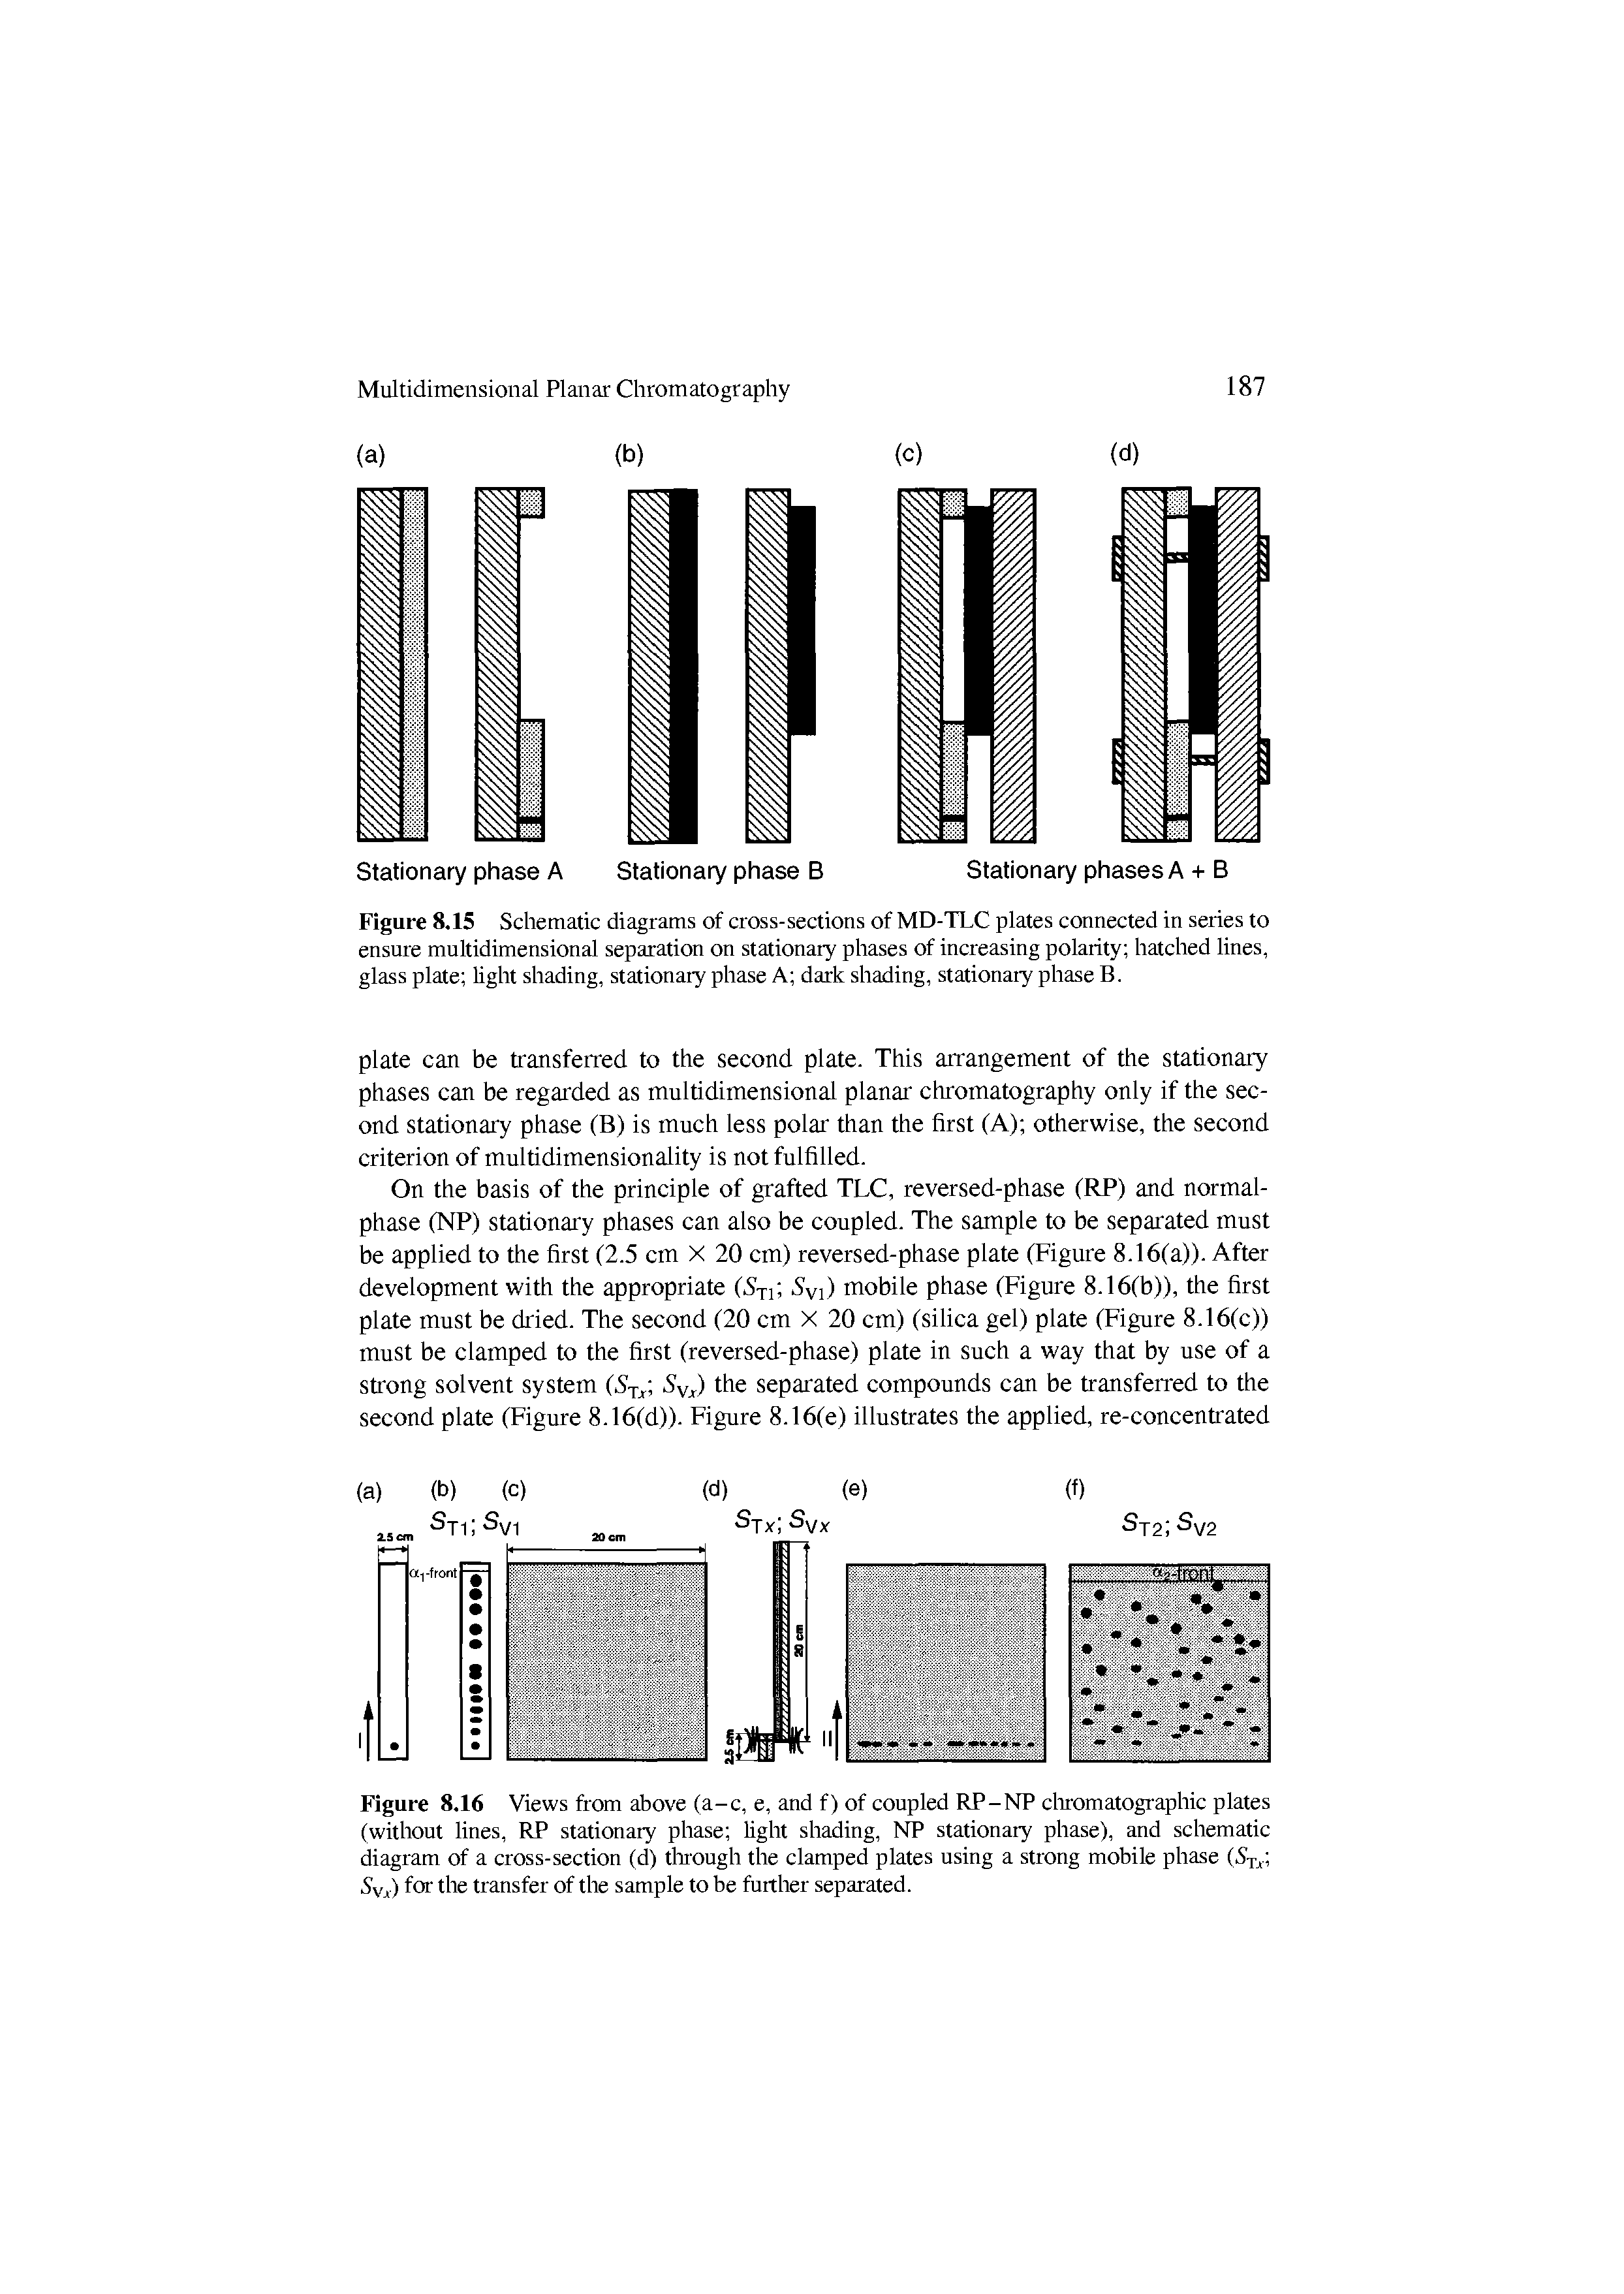 Figure 8.15 Schematic diagrams of cross-sections of MD-TLC plates connected in series to ensure multidimensional separation on stationary phases of increasing polarity hatched lines, glass plate light shading, stationary phase A dark shading, stationary phase B.